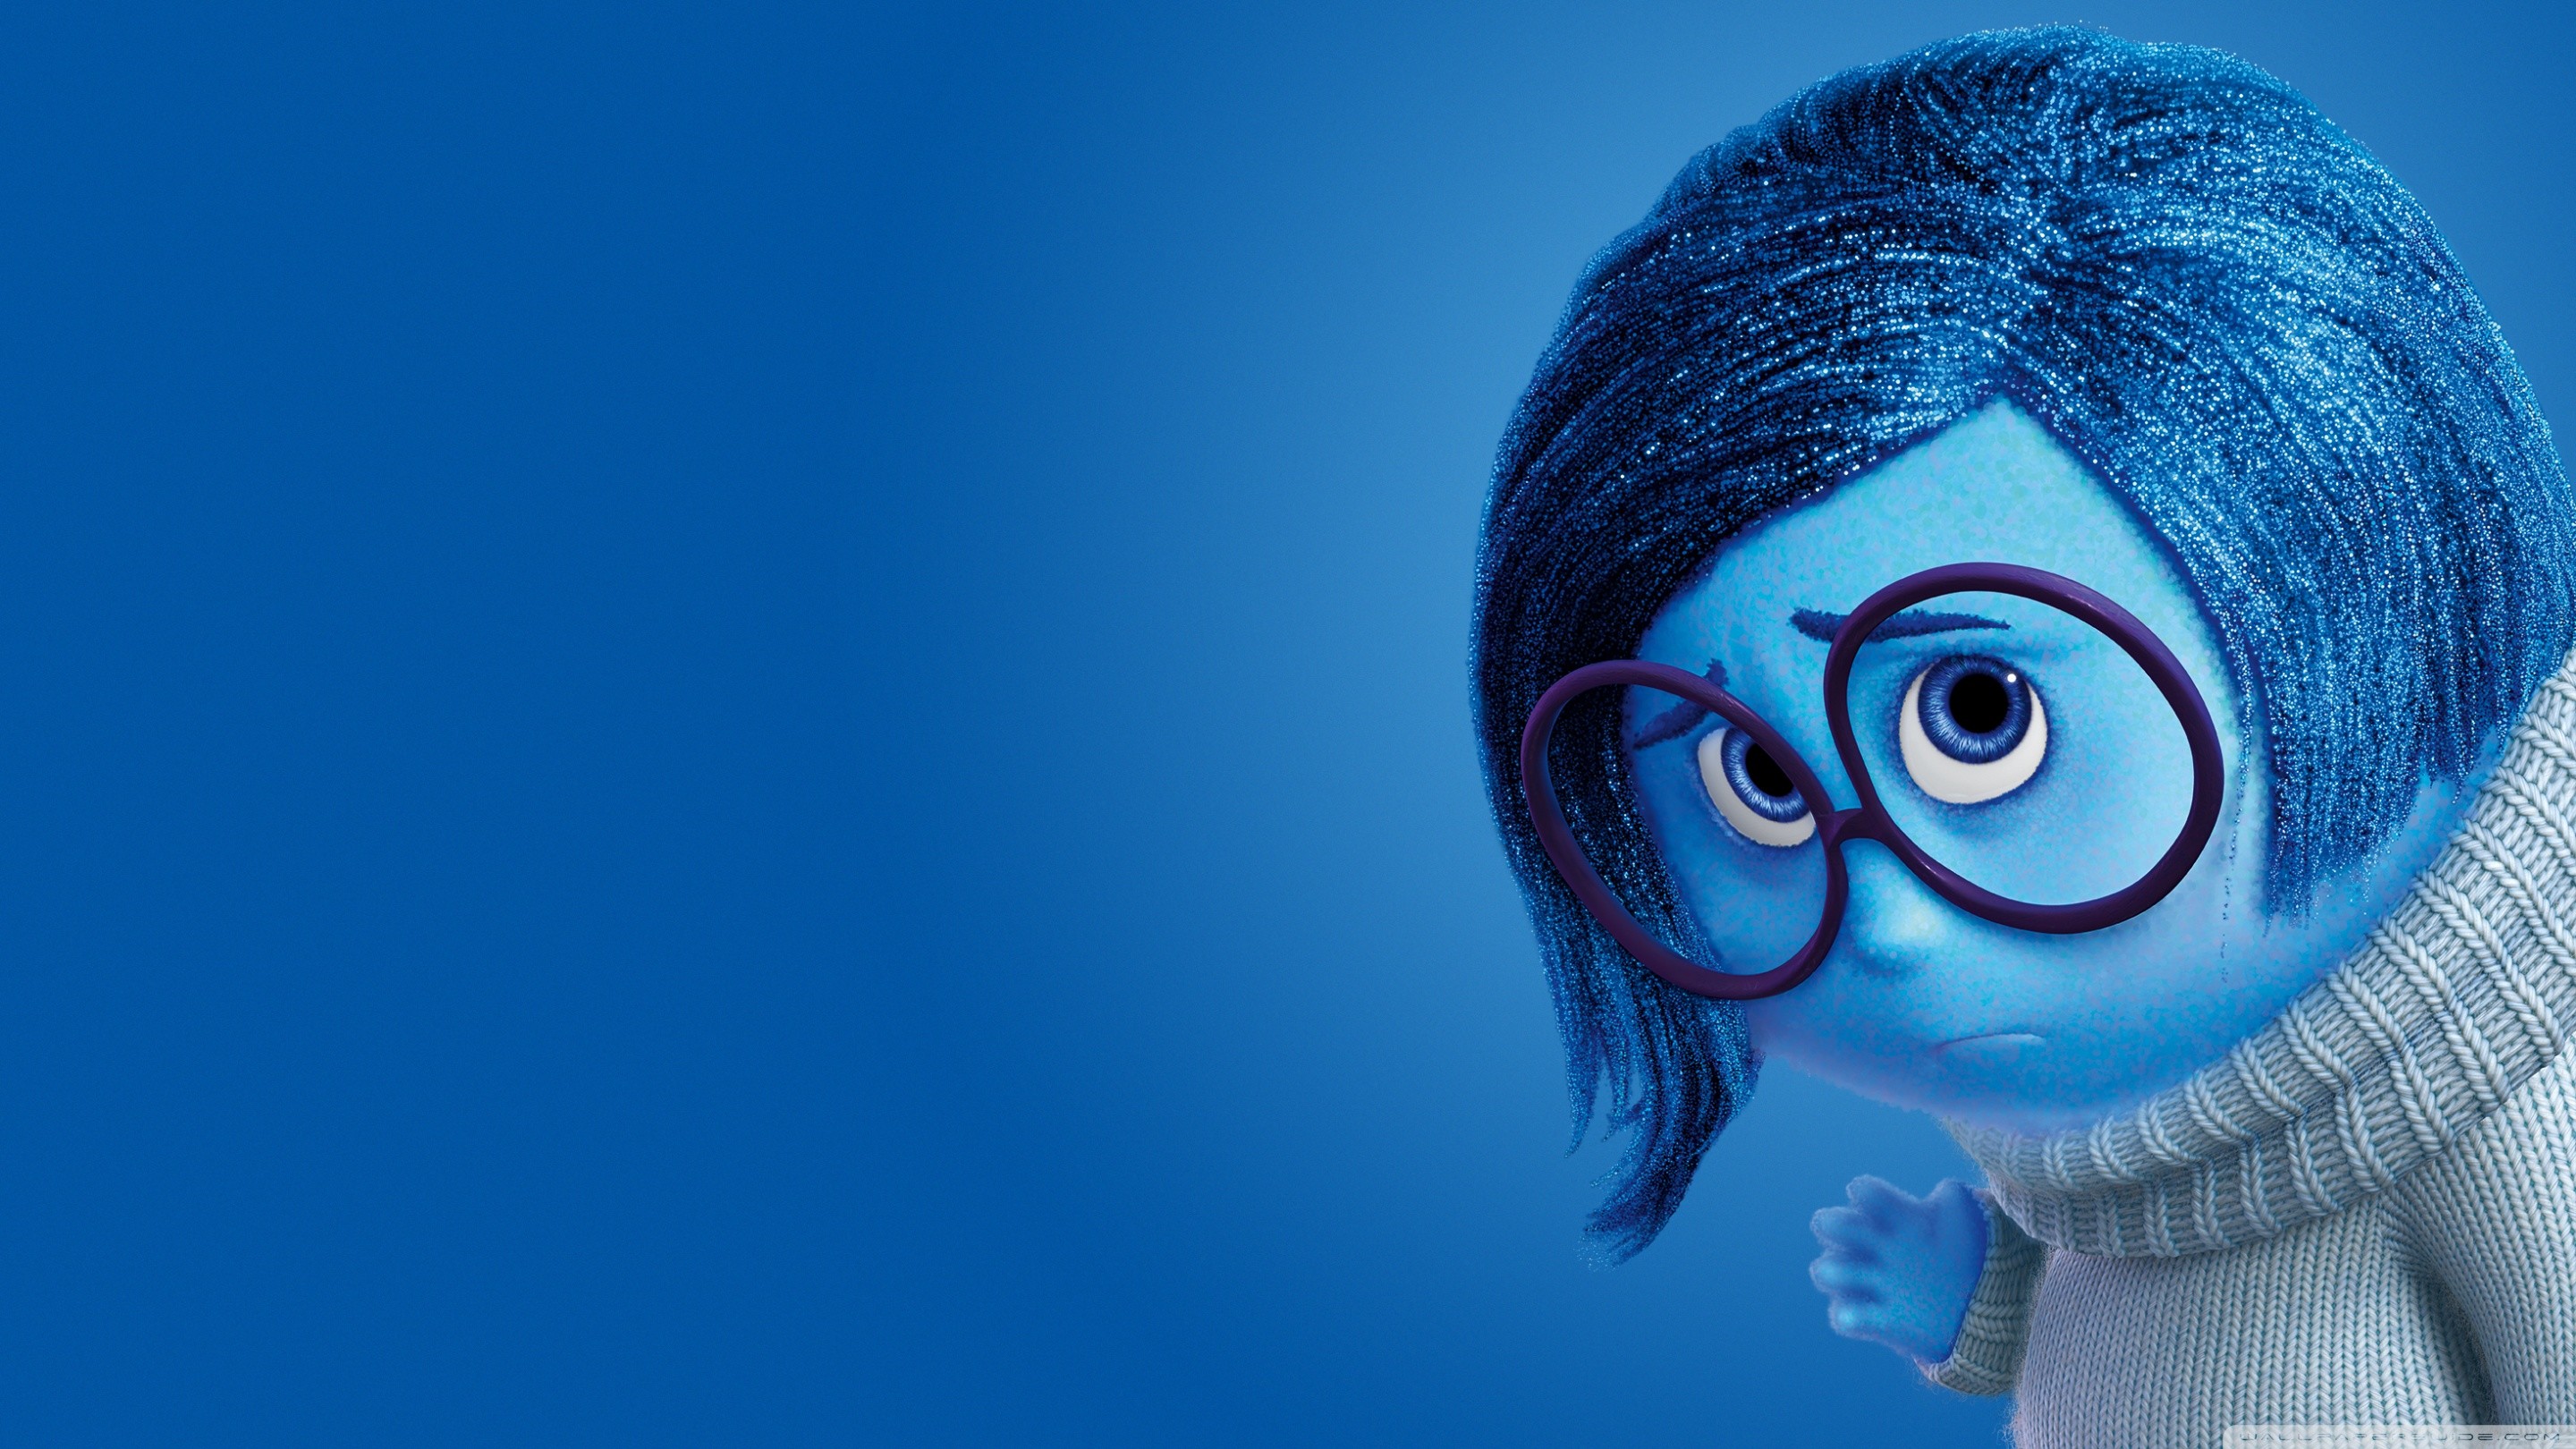 2880x1620 Wallpaper Pixar Up Cave On Download The Hd Image Of Cartoon Movie .